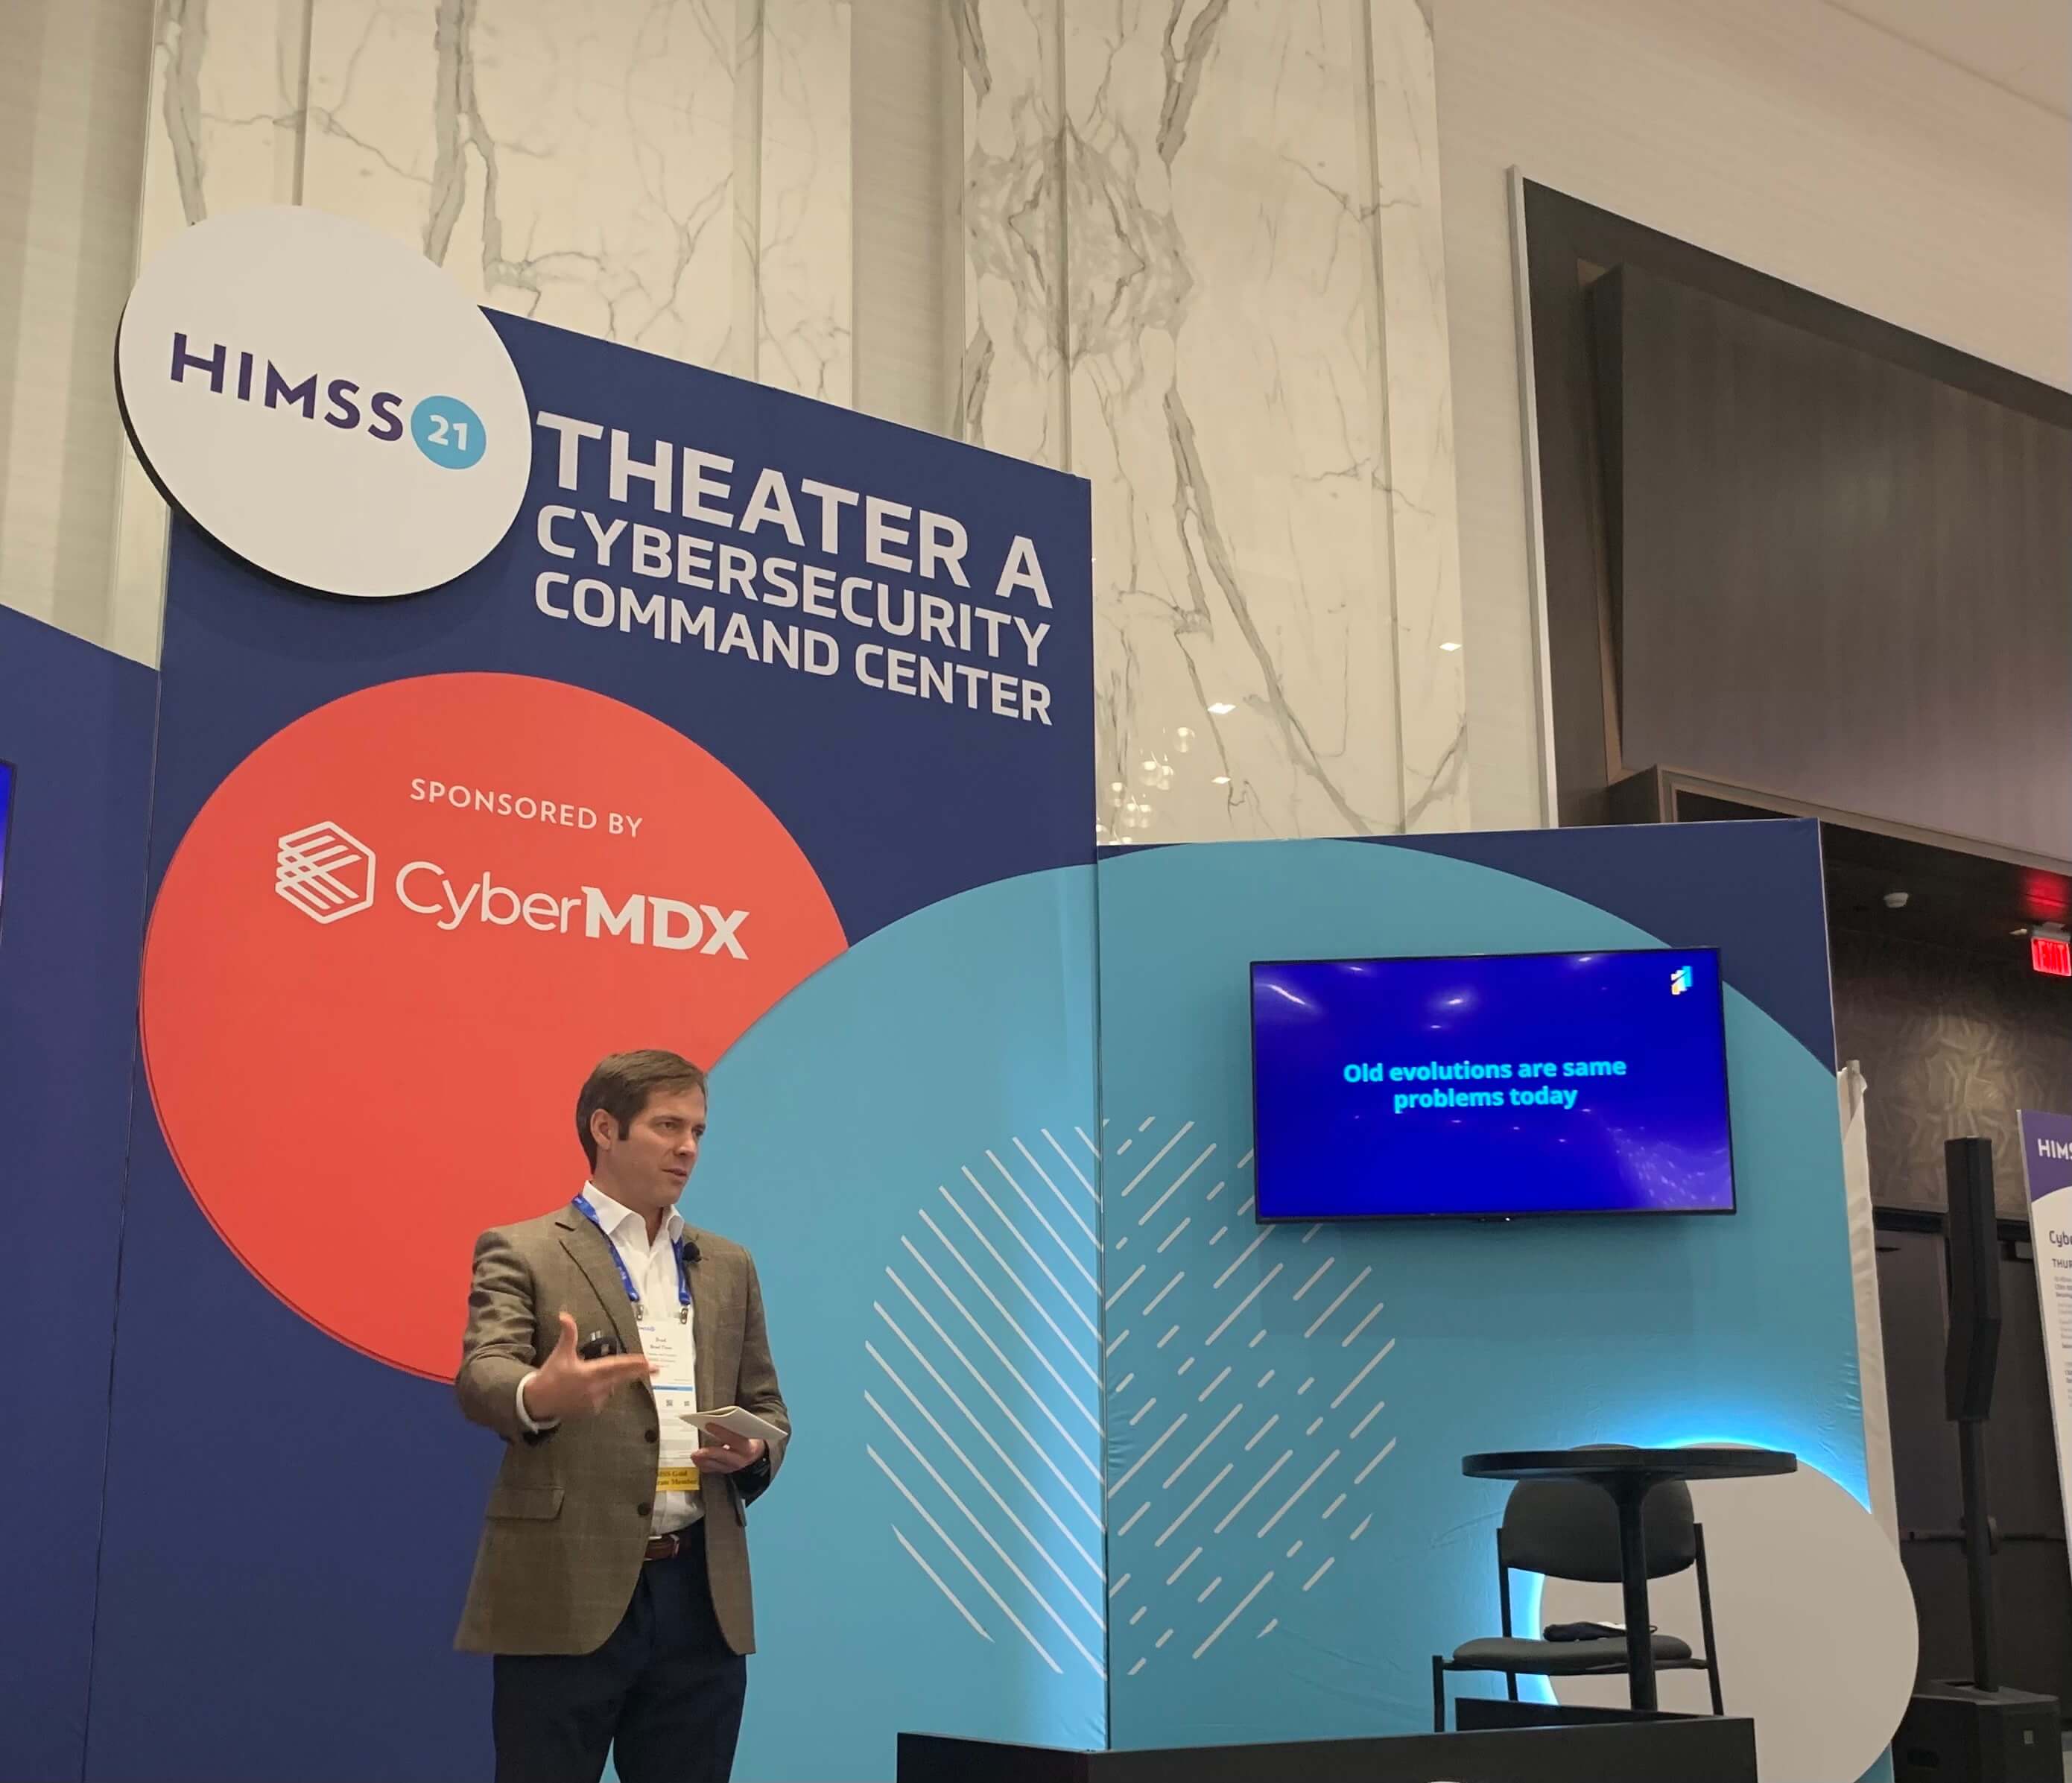 BARR Wraps Up a Successful HIMSS21, Shines Light on Healthcare Security in the Cloud